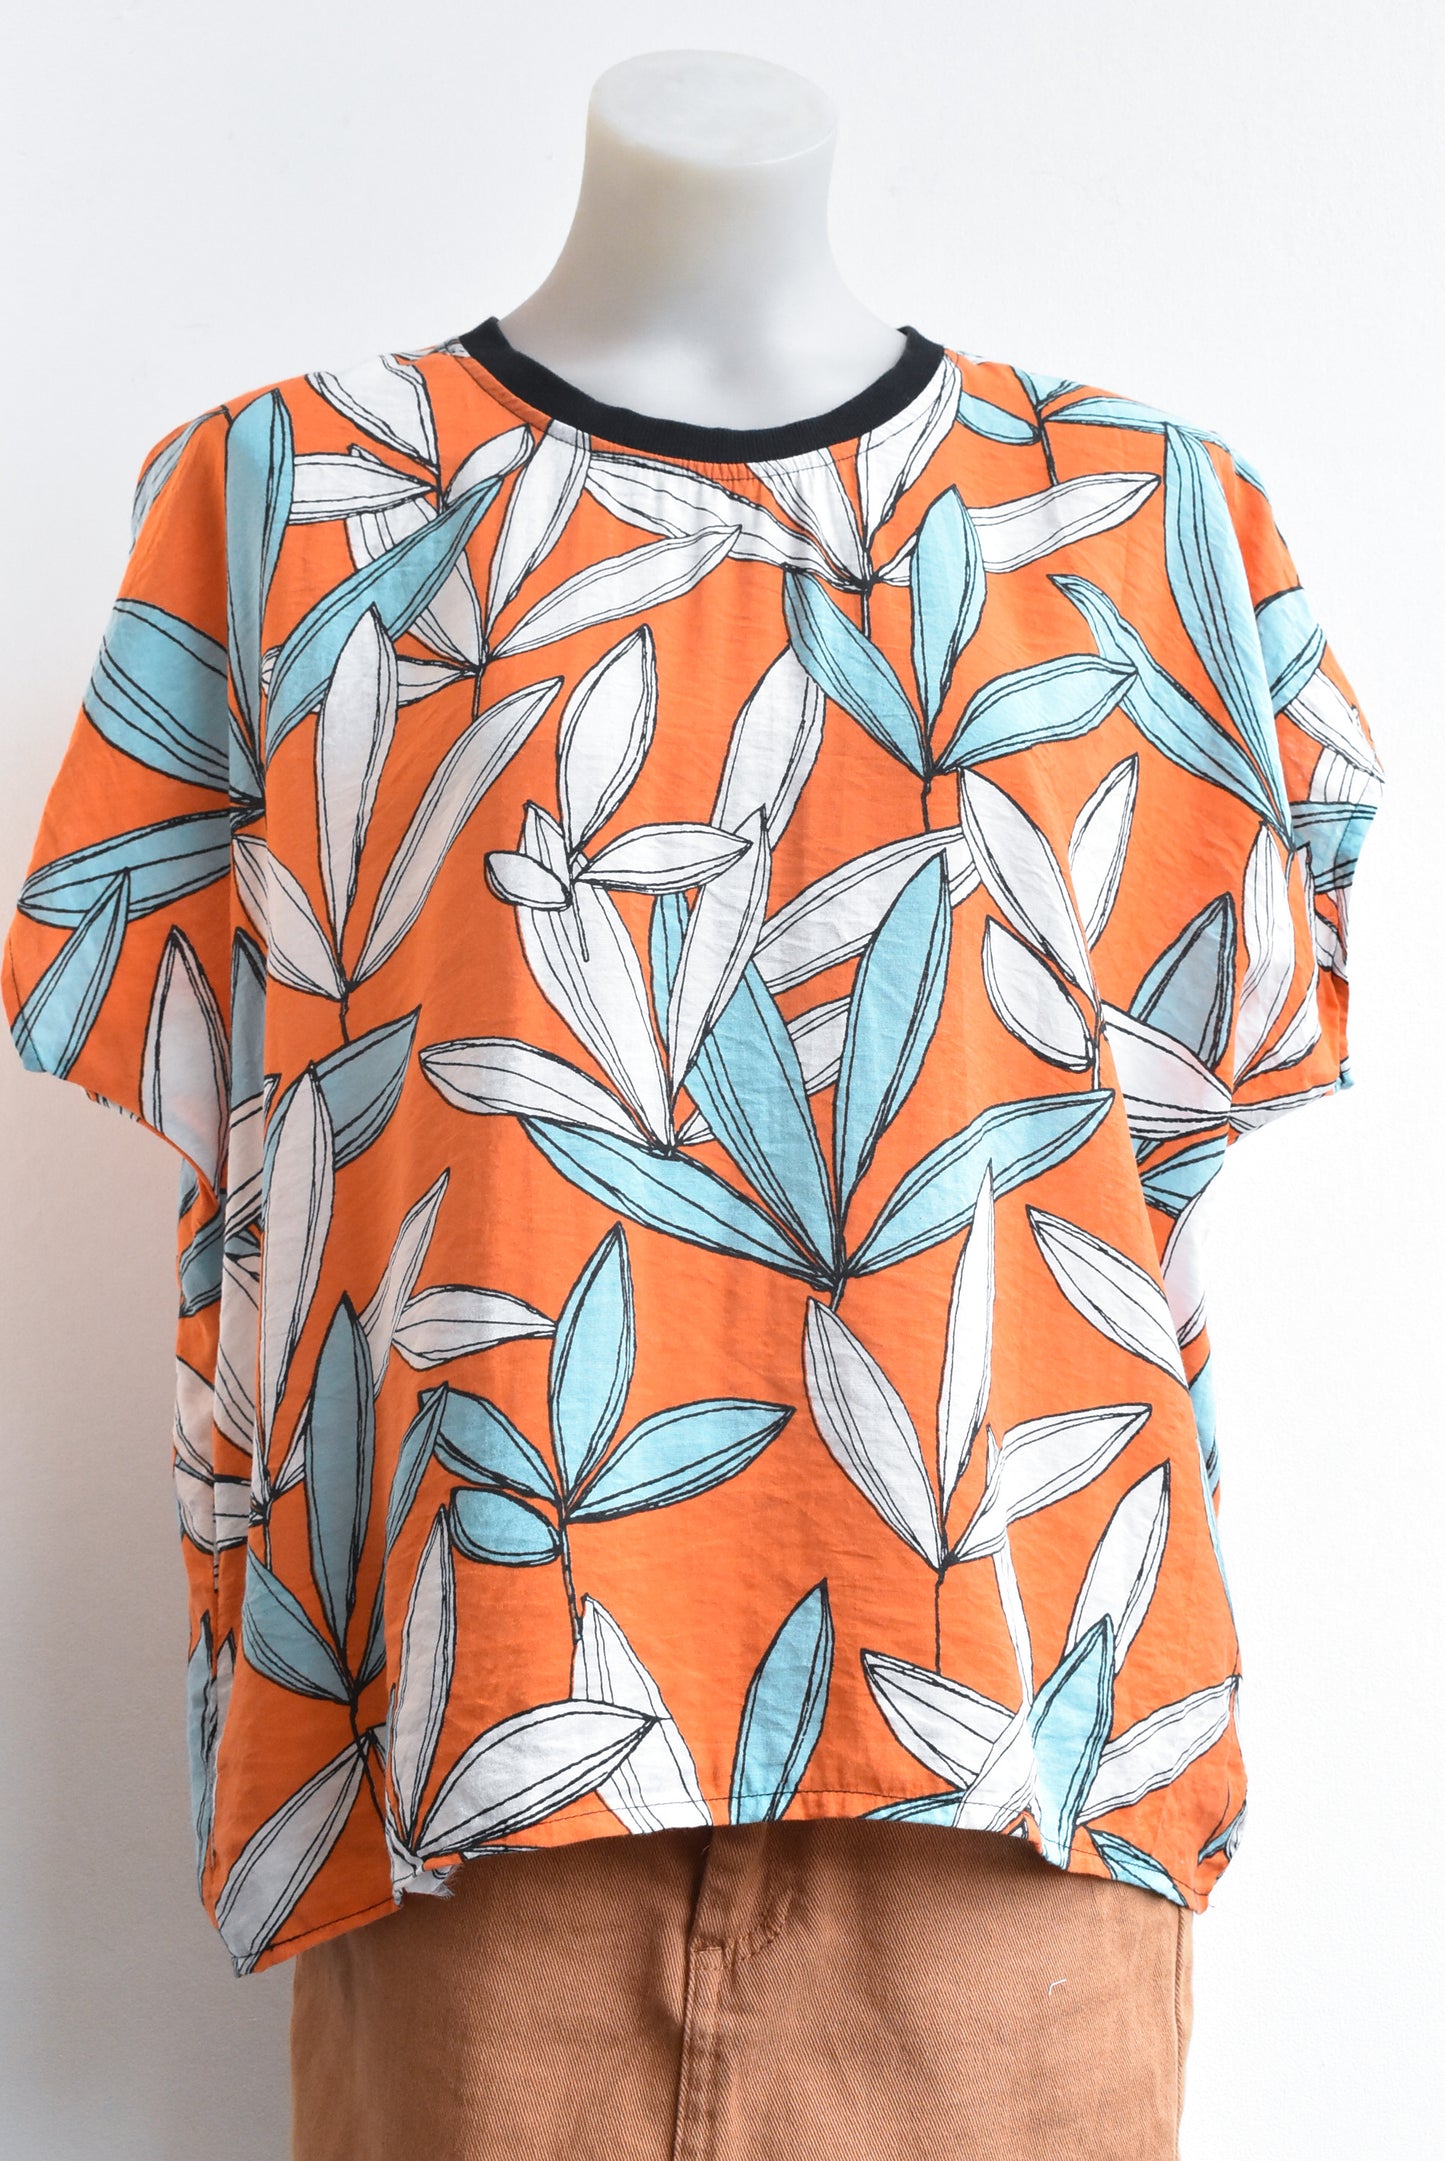 The Bloom Project leafy orange top, M/L